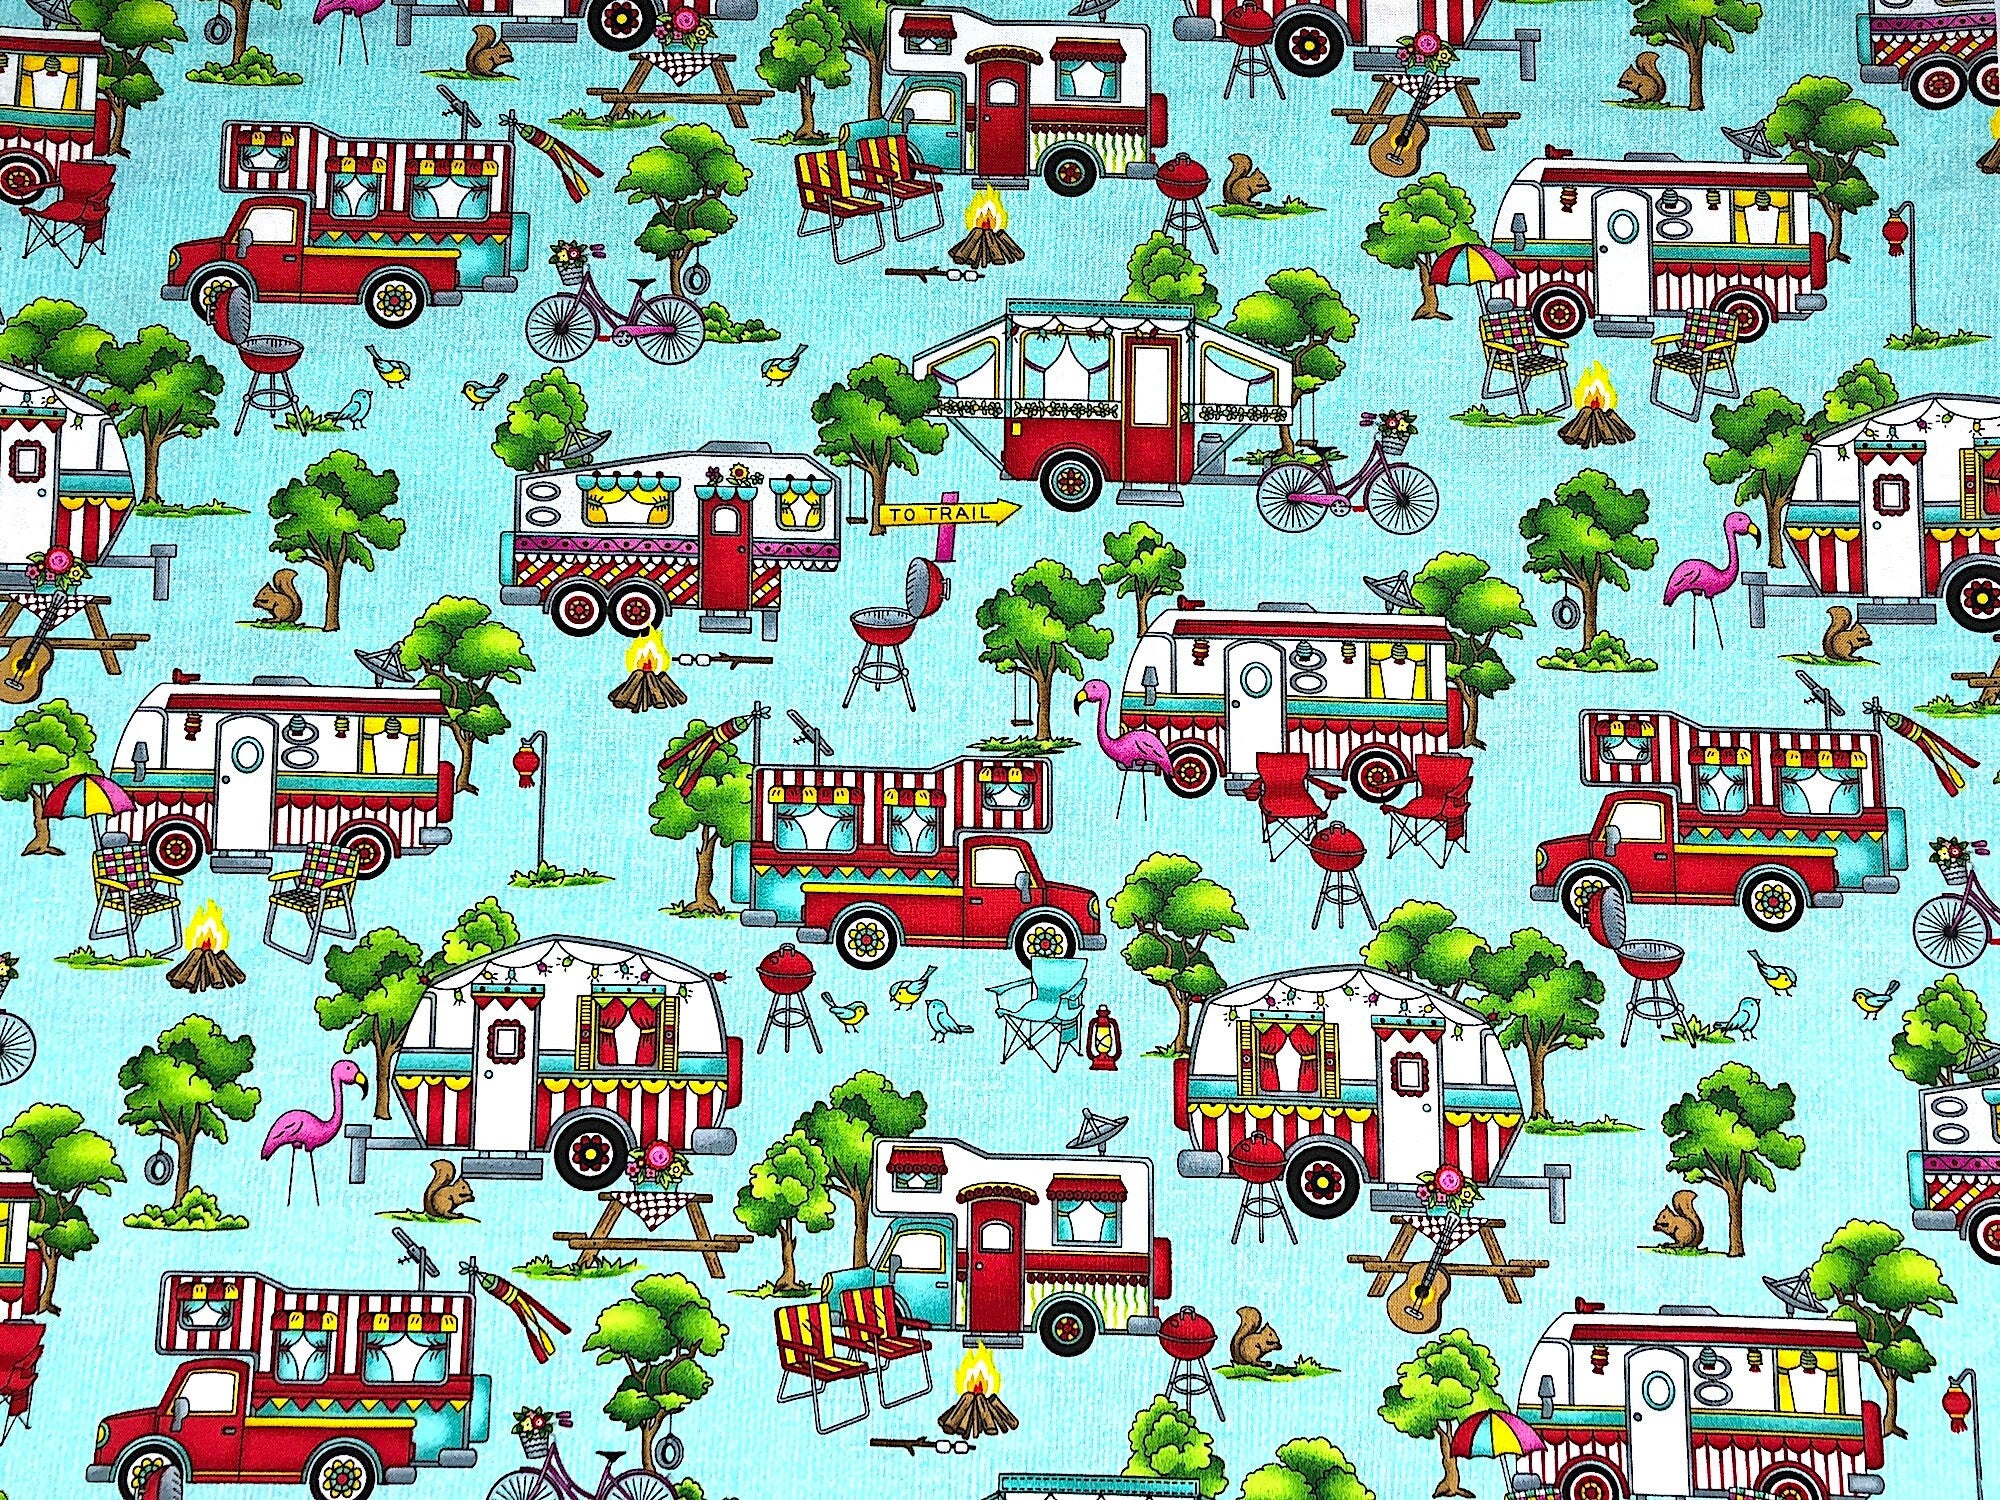 This fabric is called landscape and is covered with travel trailers, campers on trucks, 5th wheels pop up tents, trees, lawn chairs, grills, birds, trees and more.